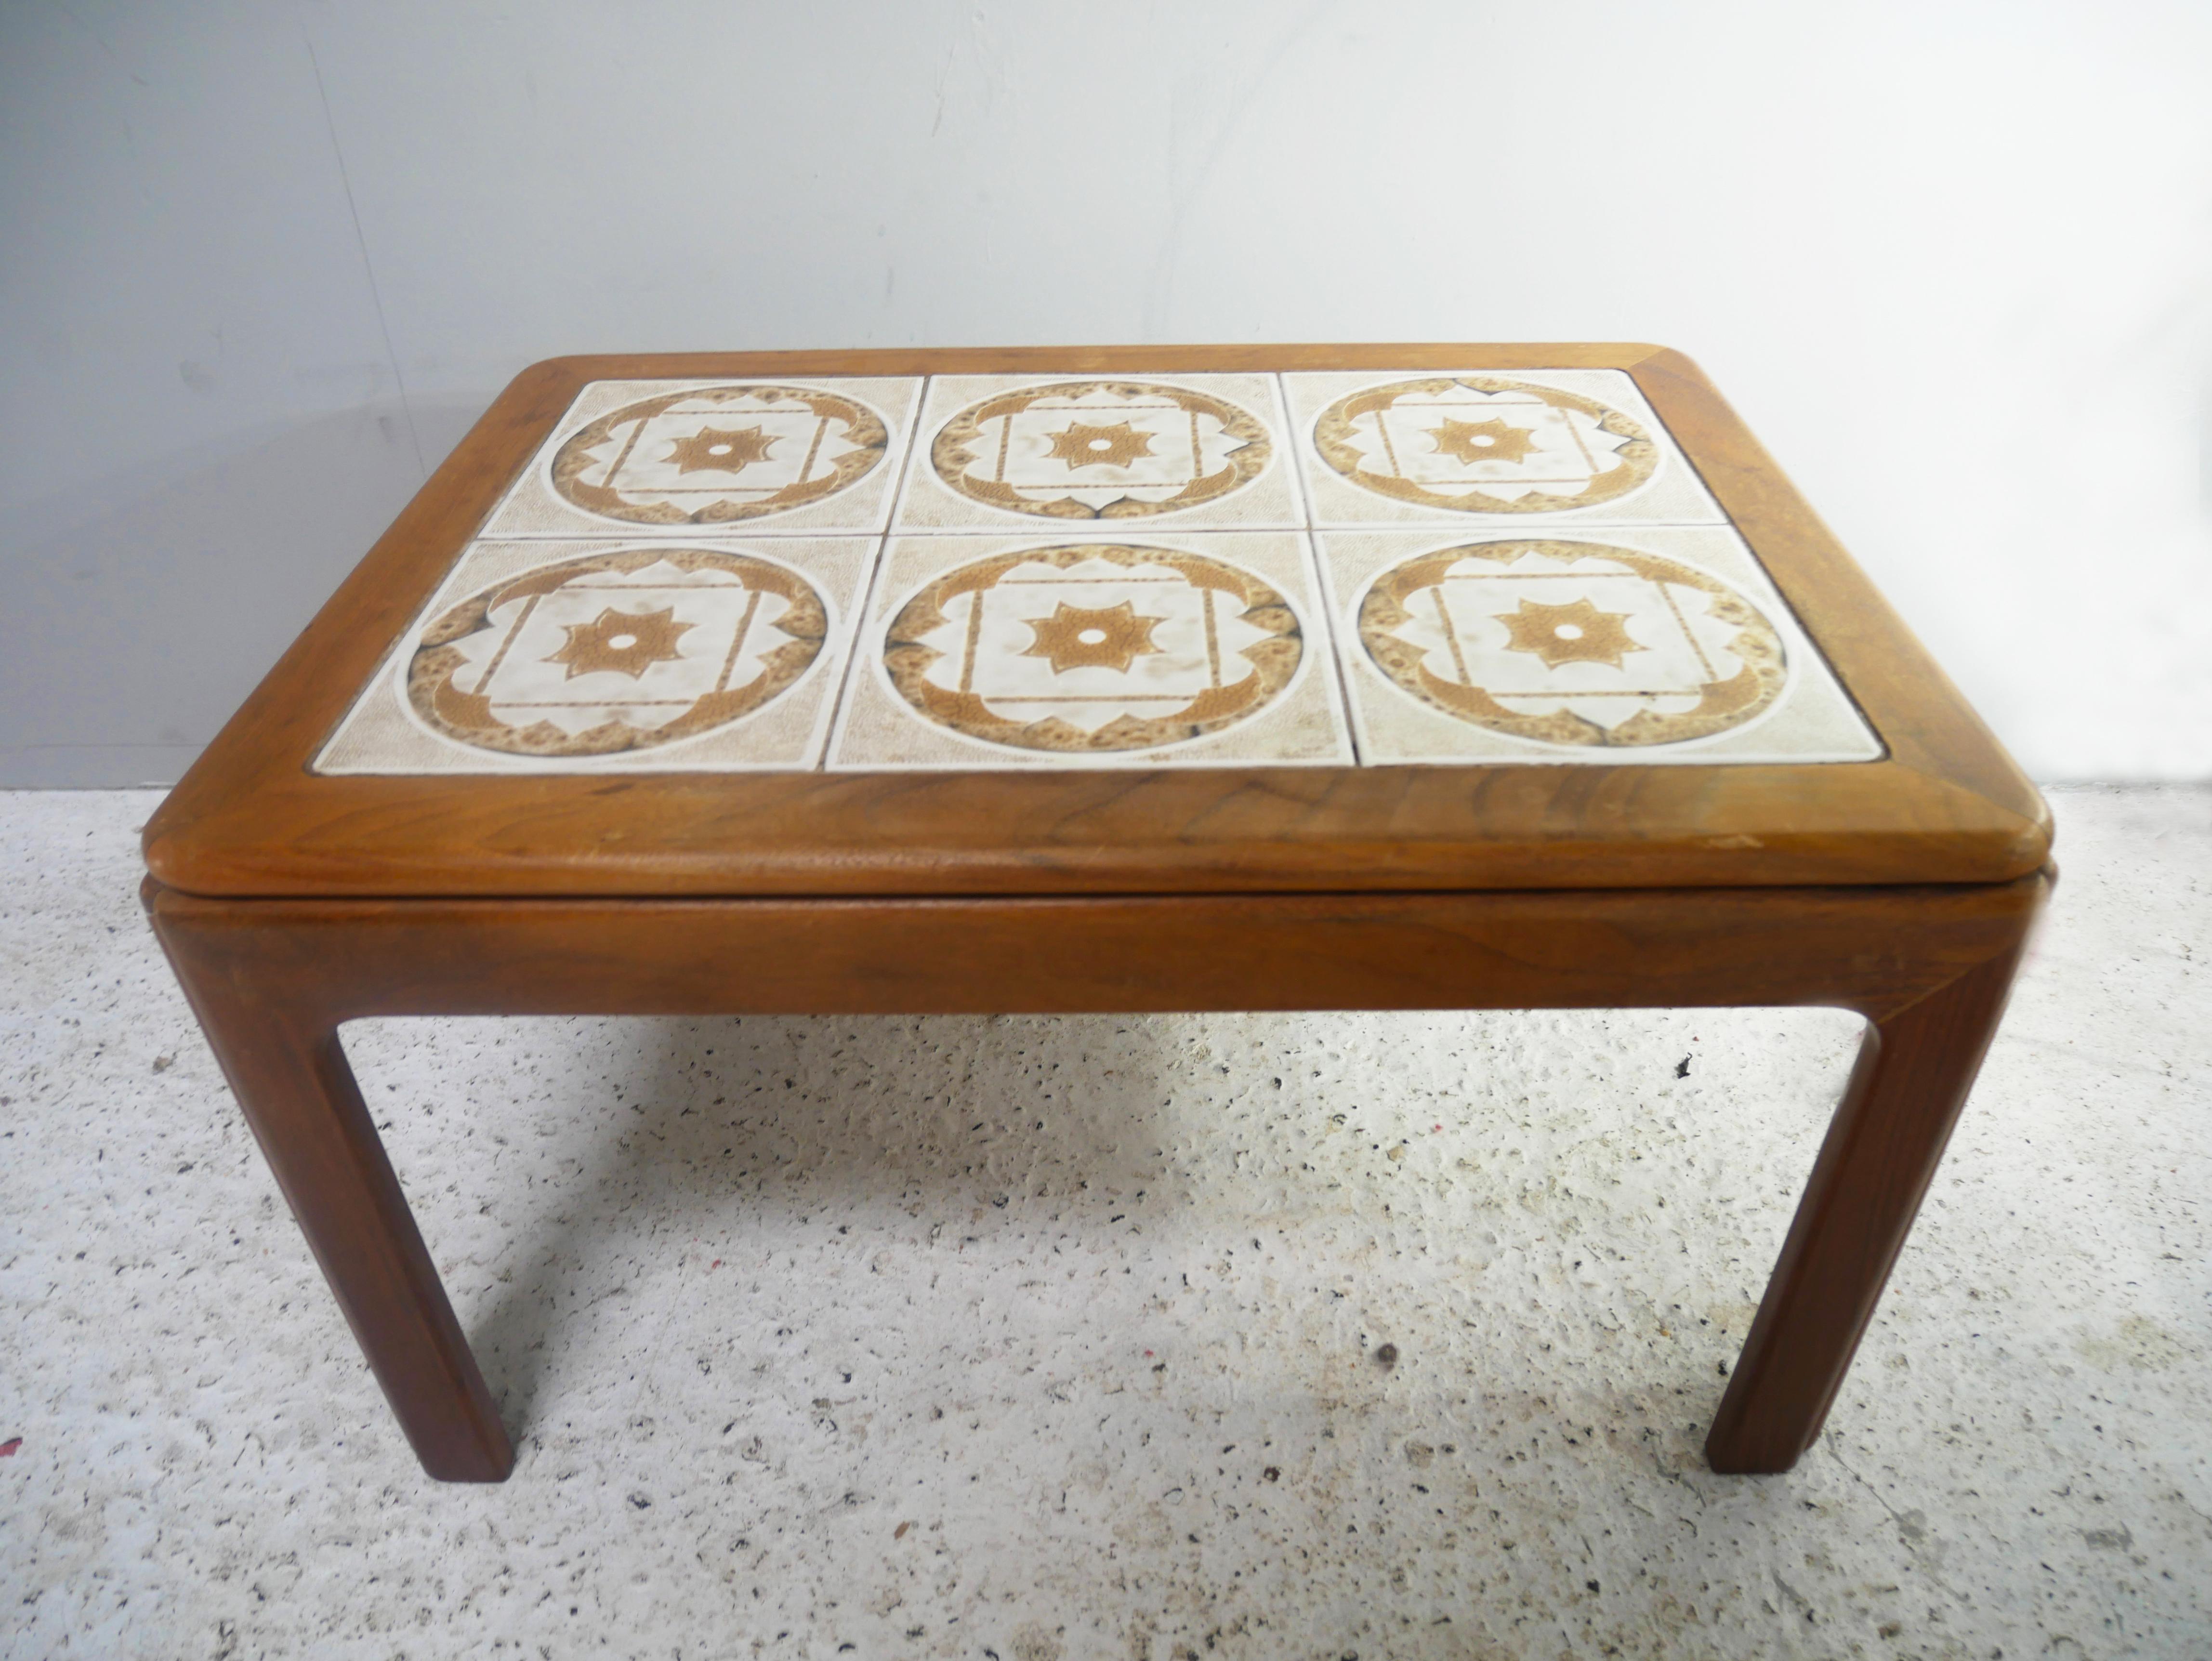 From the famous British manufacturer G-Plan Furniture, this is a mid century modern/vintage coffee table produced the 1960's. With a white and brown decorative patterned ceramic tiled top sitting on a solid oak frame. Warm and richly wood 

Size: